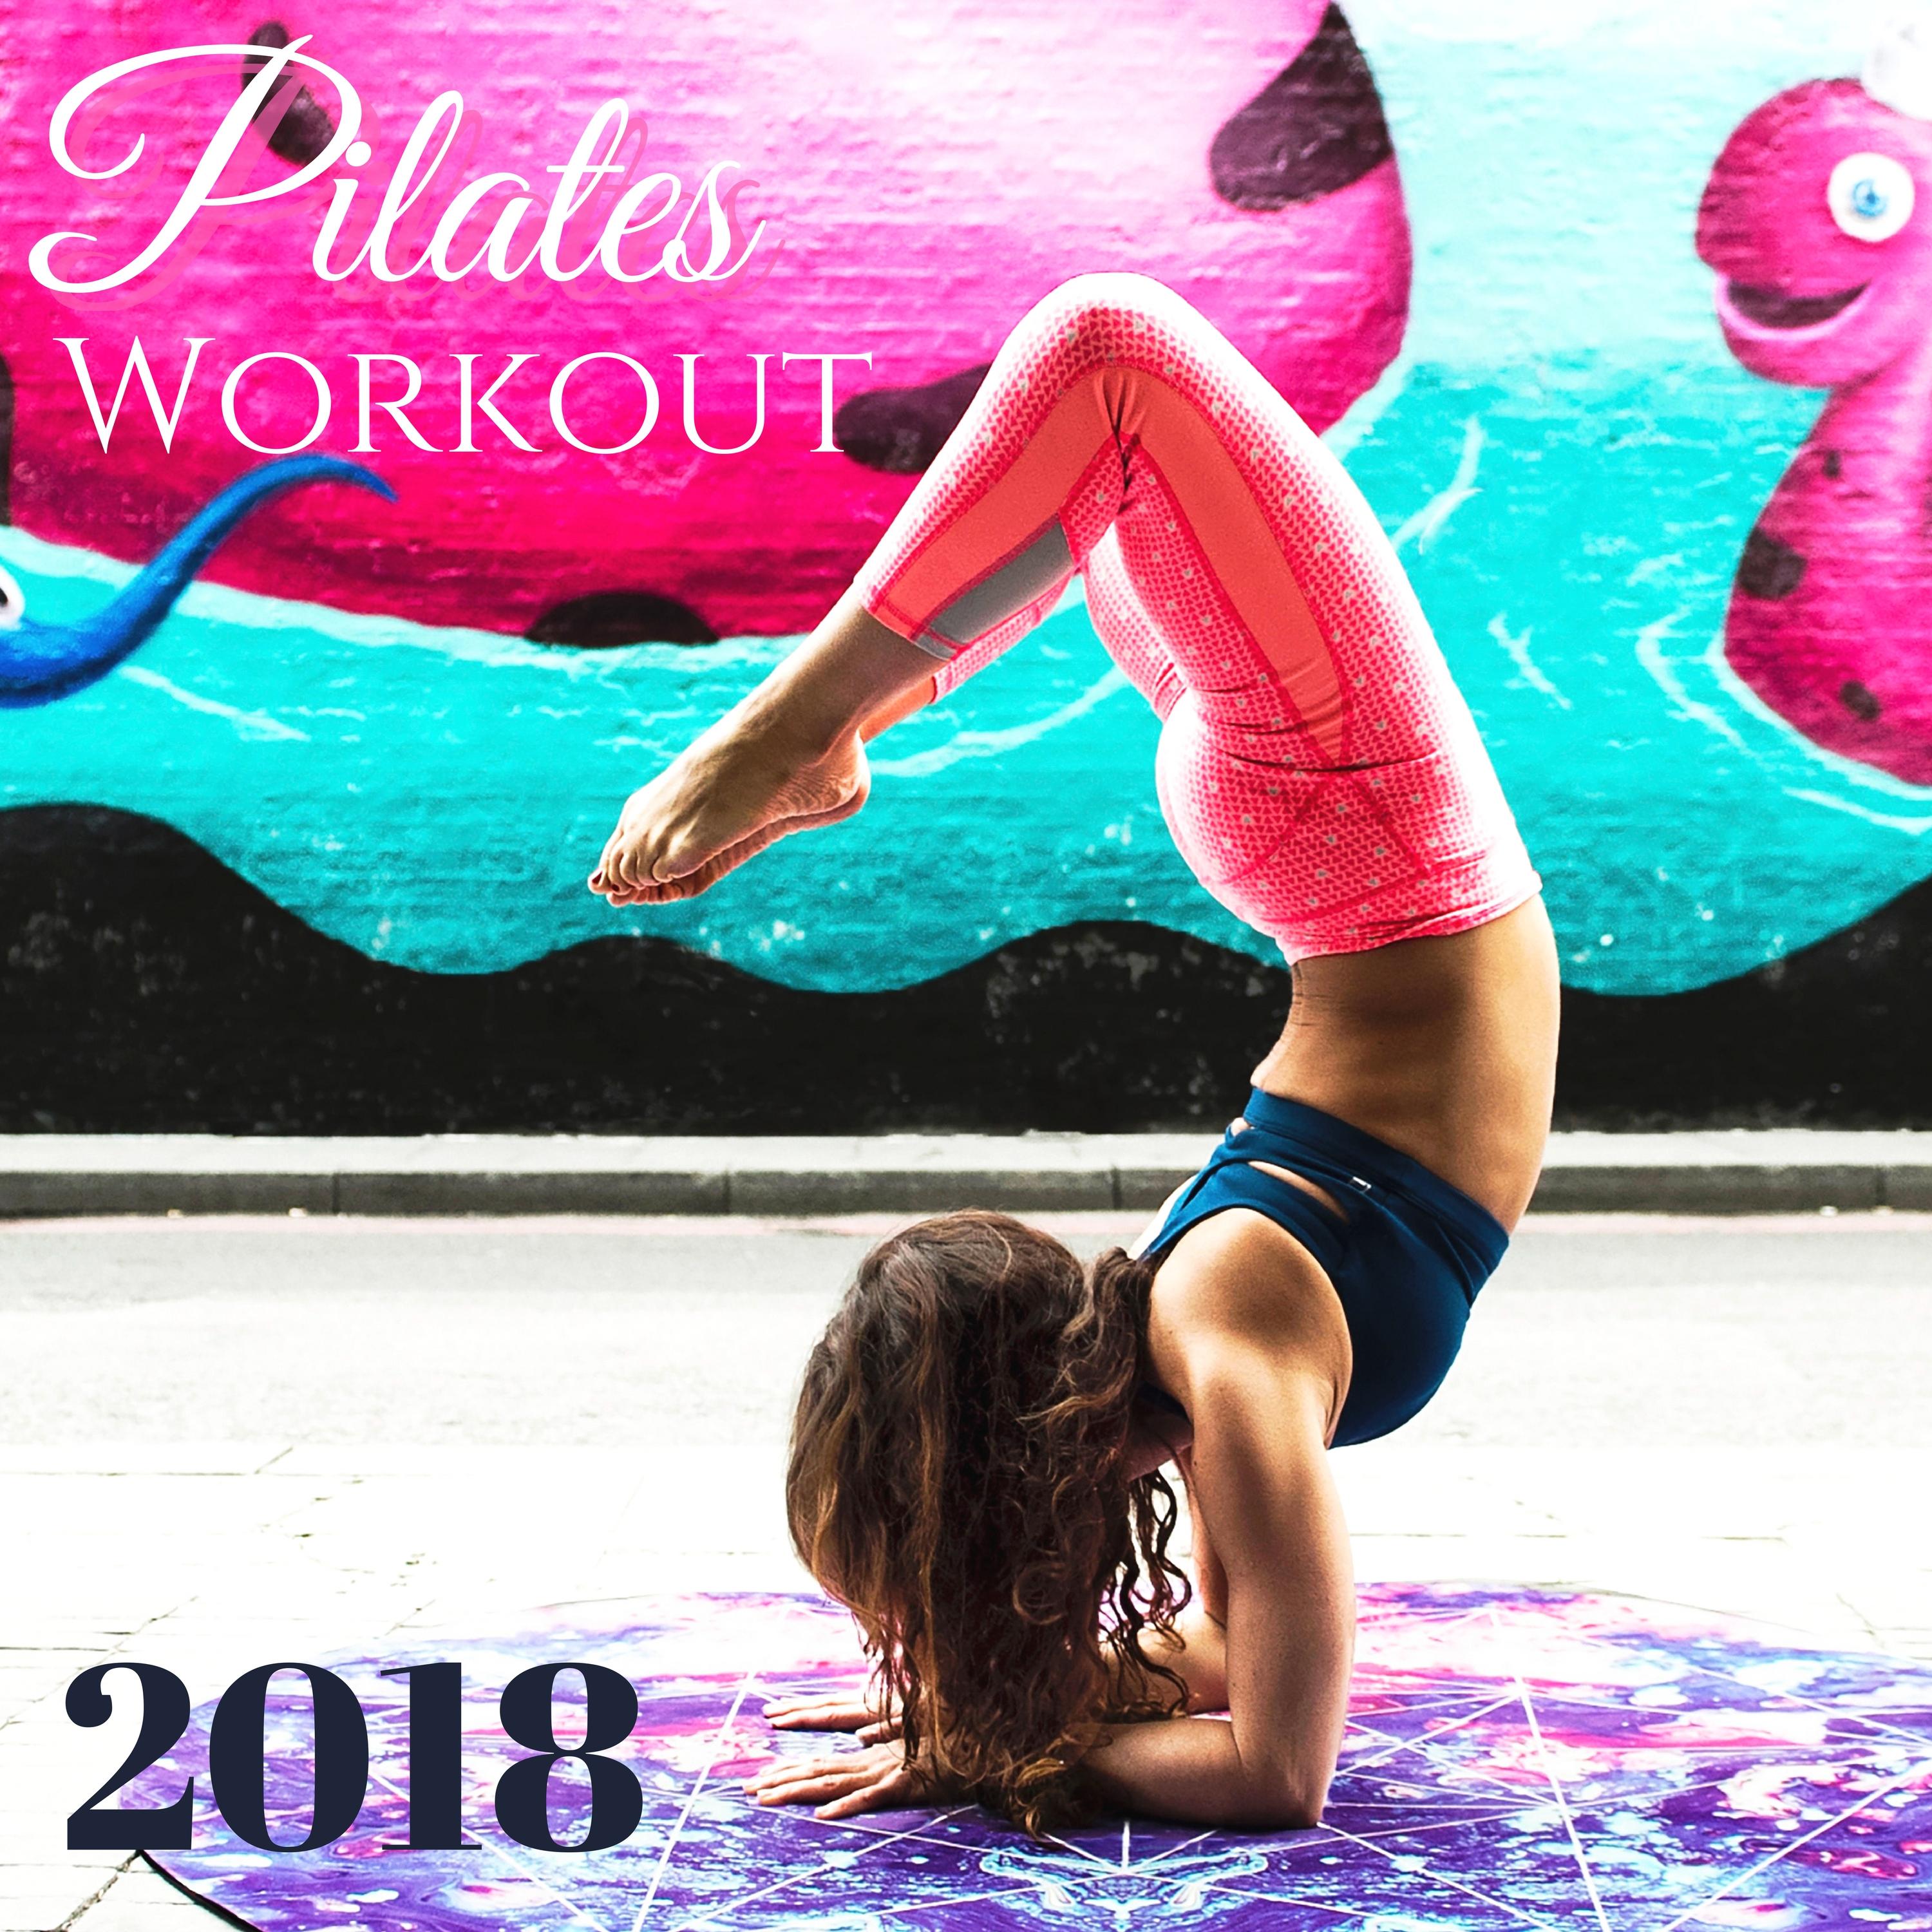 Pilates Workout 2018 - Best Instrumental Pilates Music Compilation for Yoga, Workout, Gym and Fitness